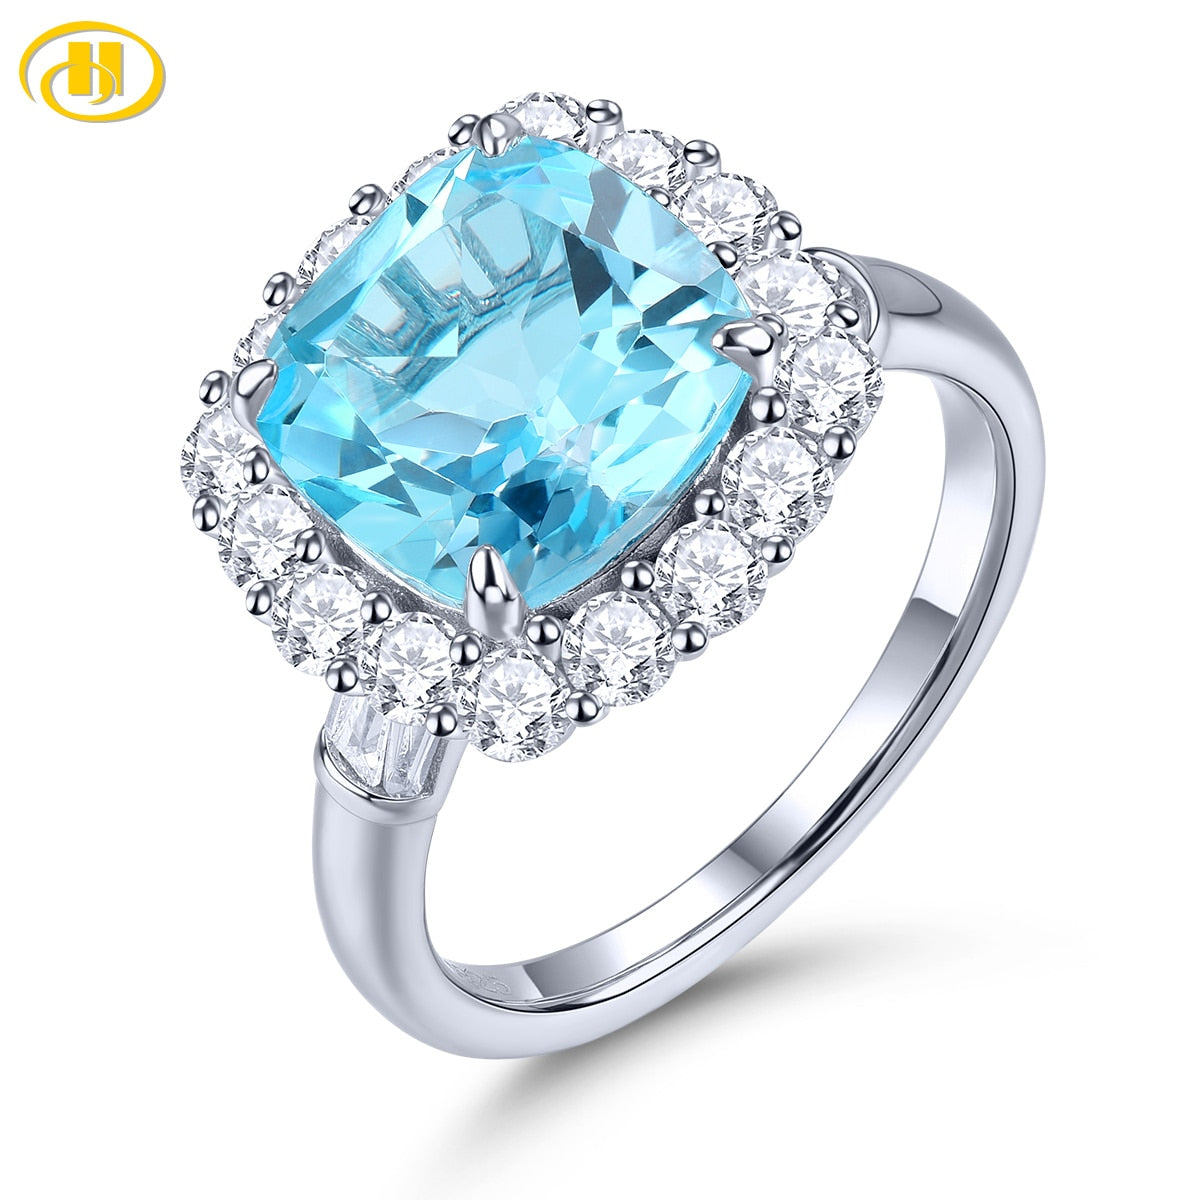 Natural Sky Blue Topaz Sterling Silver Rings Cushion Design 2.5 Carats Women Classic Jewelry S925 Anniversary Birthday Gifts